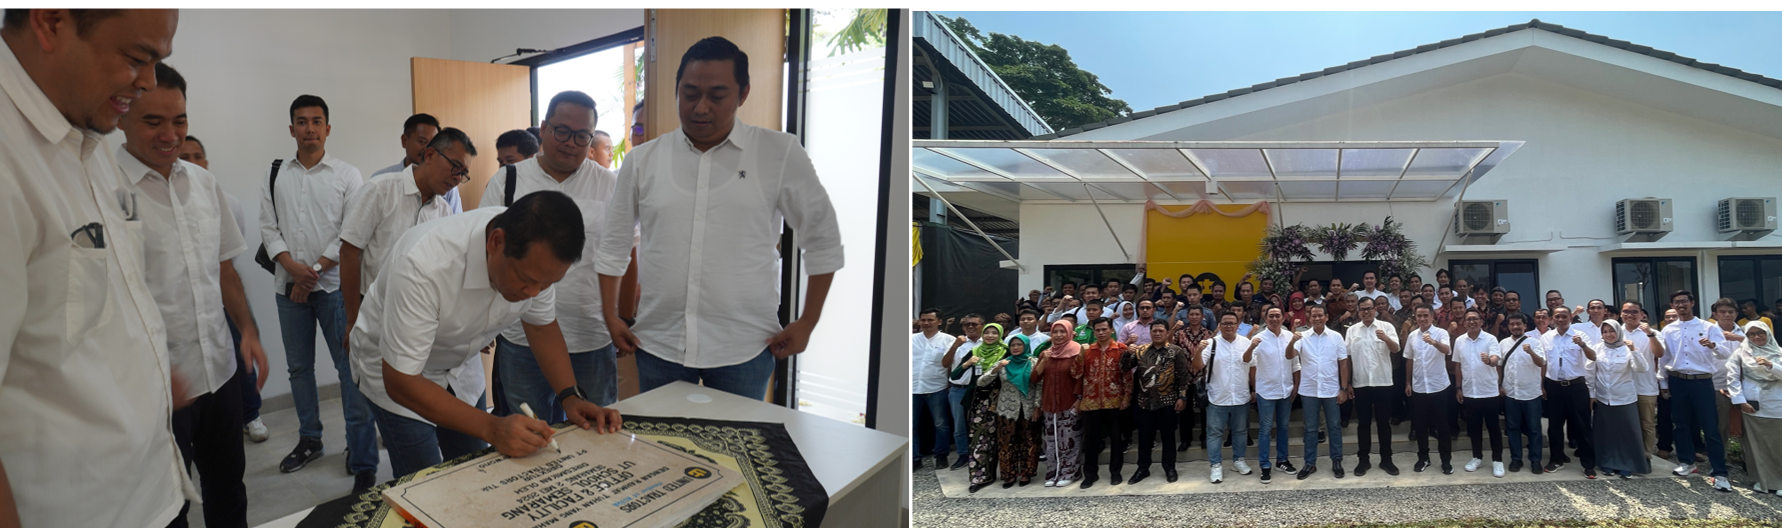 The inauguration ceremony of the new UT School Semarang Branch building was held on National Education Day.